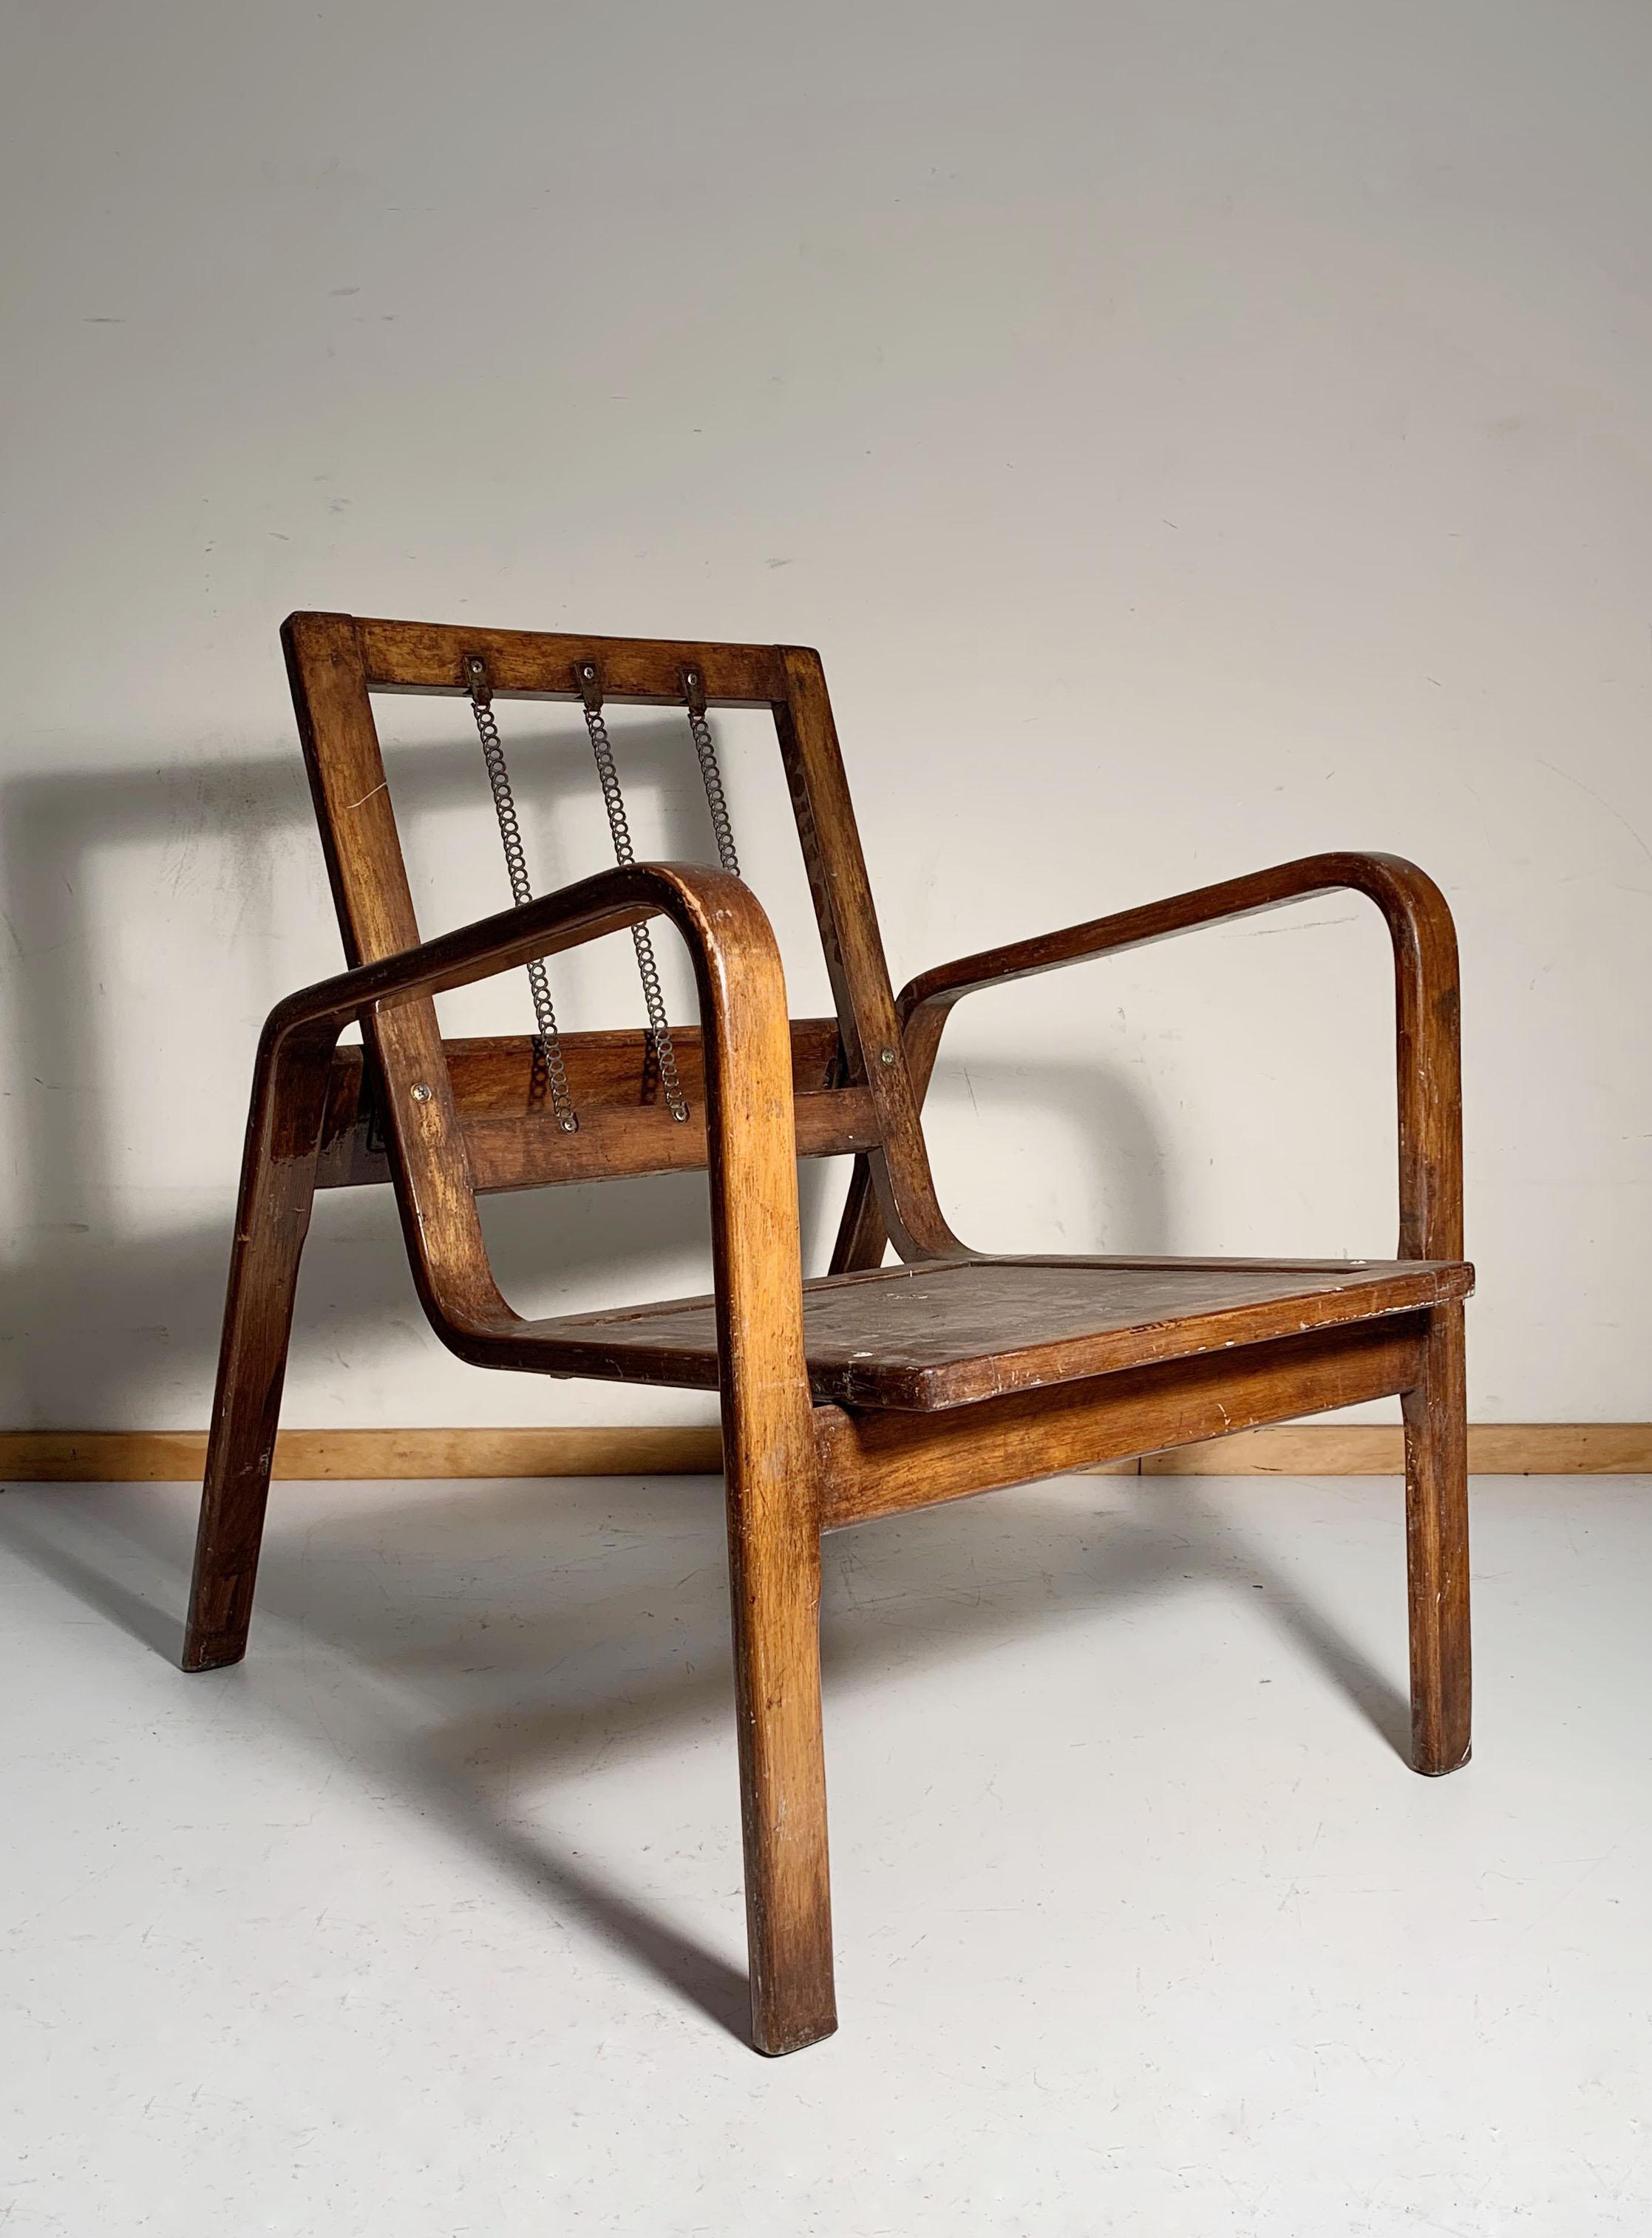 Pair of Early Bentwood Danish Lounge Chairs. Not certain about the origin, but judging from the design, materials, and the original light finish to underside, I believe these to be Scandinavian or possibly German being either from Germany or